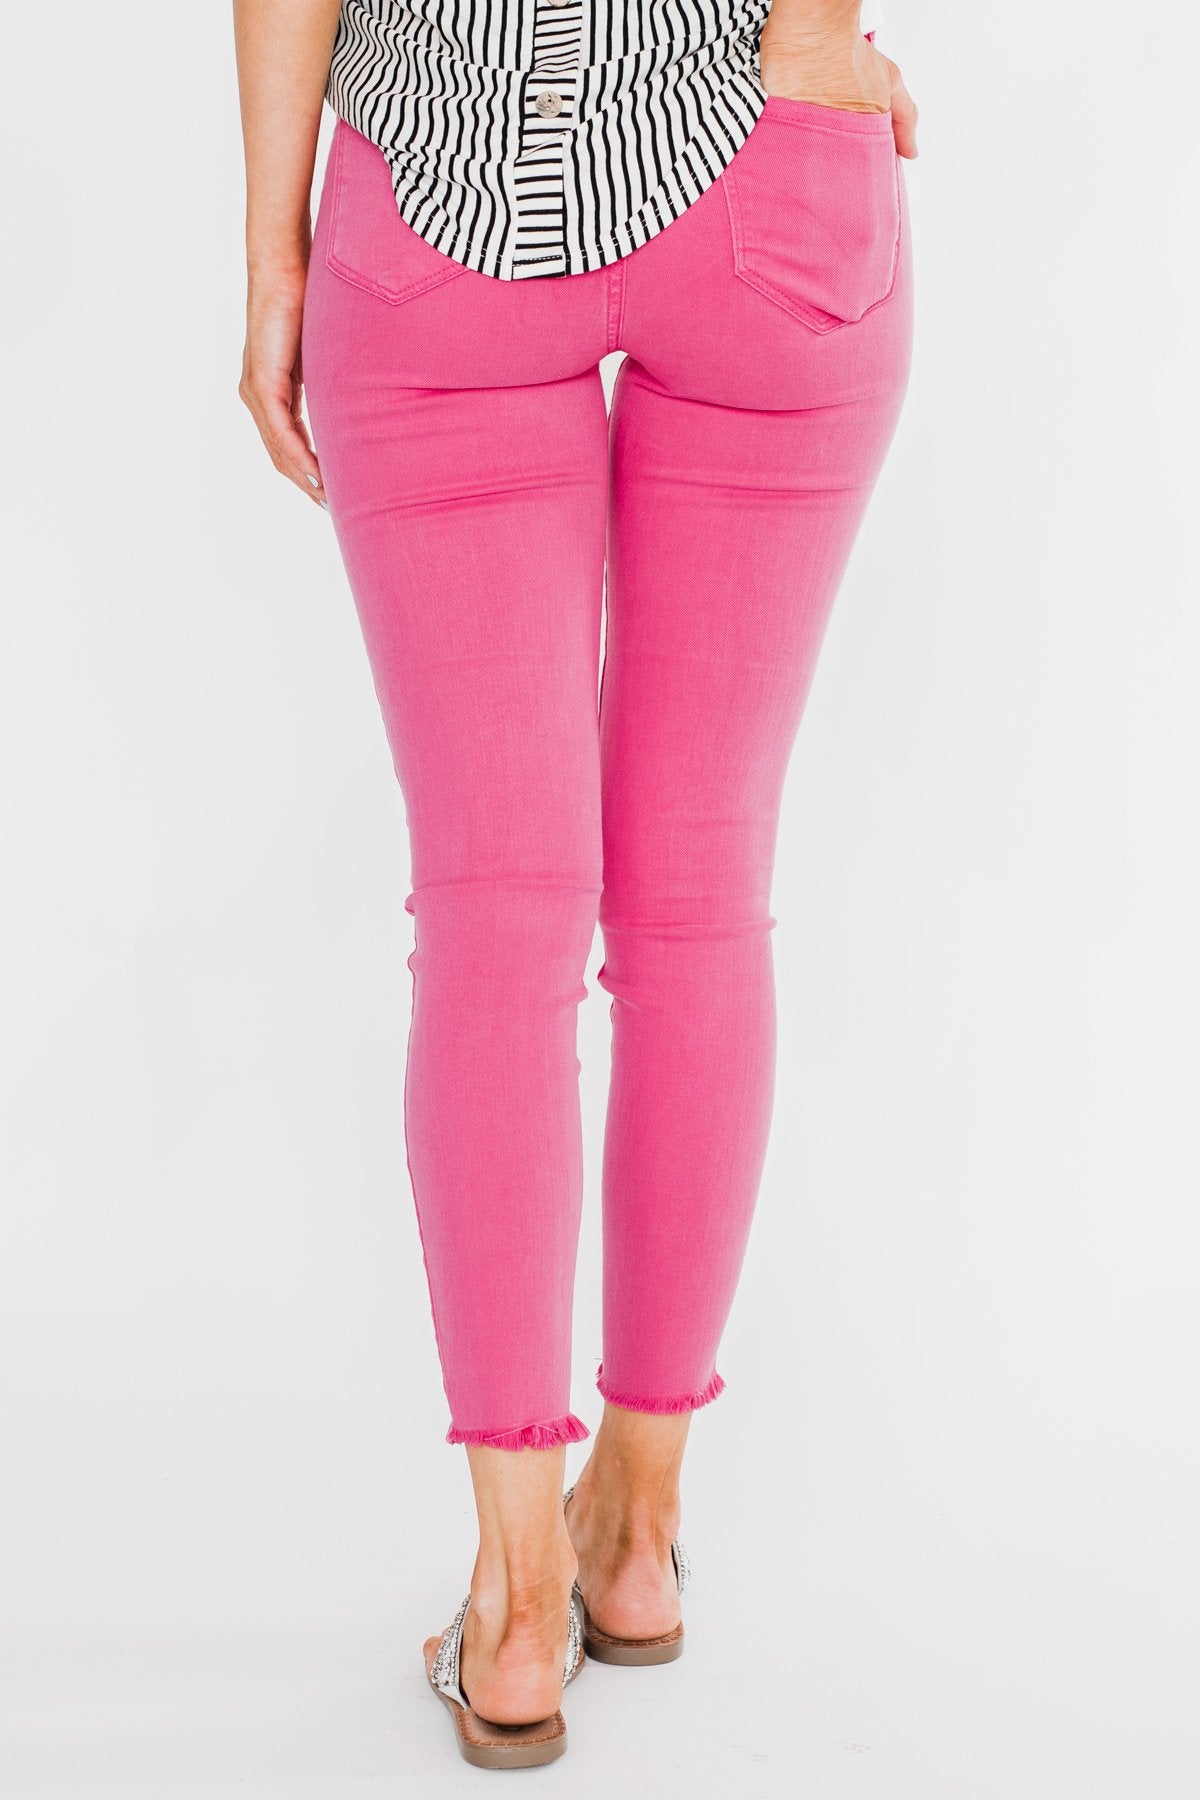 Cello Colored Skinny Jeans- Hot Pink